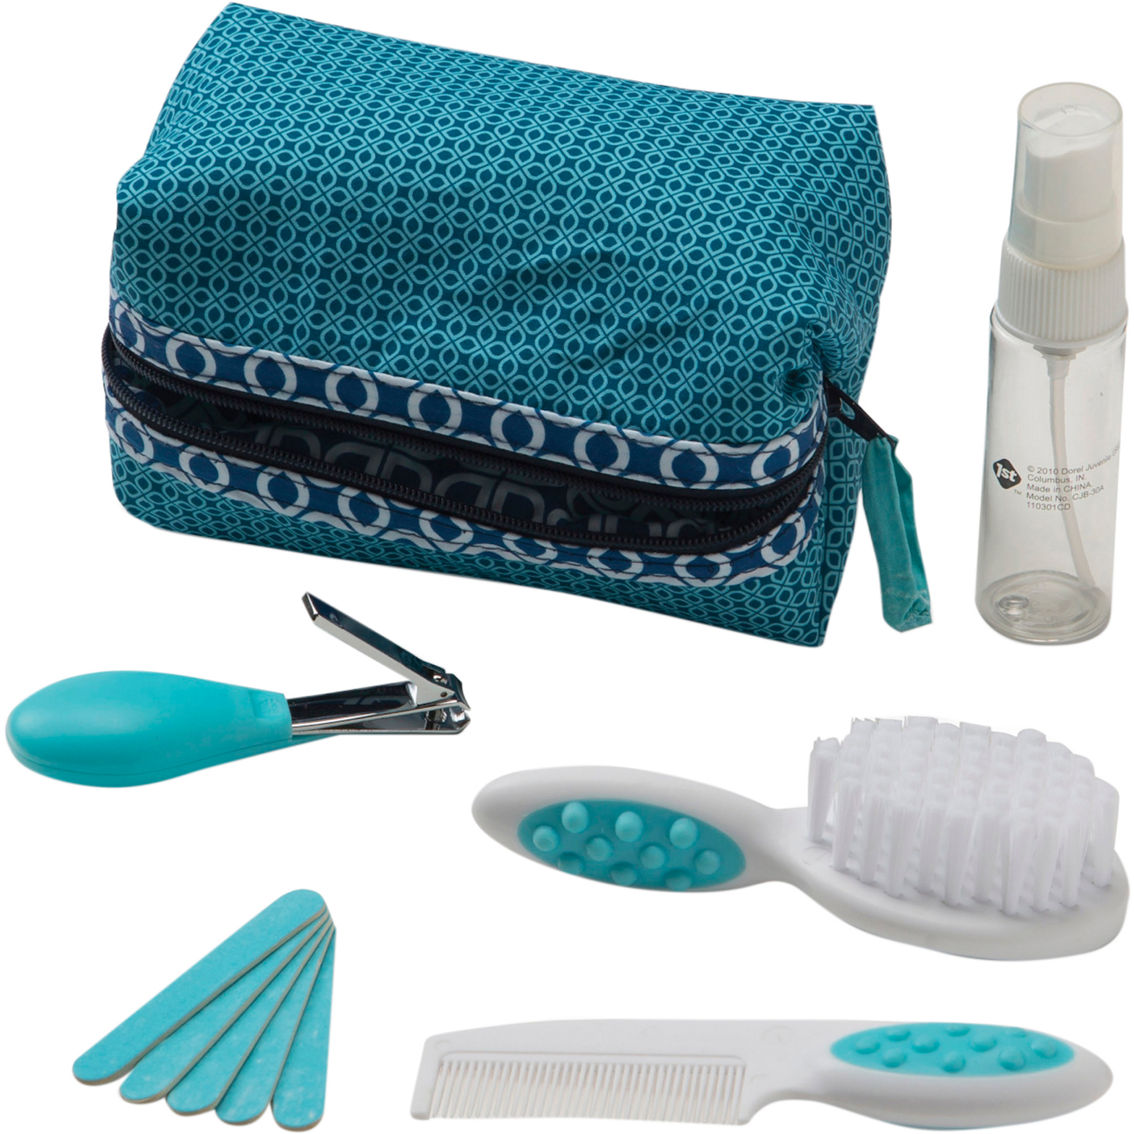 Safety 1st  Baby's First Grooming Kit - Image 2 of 2